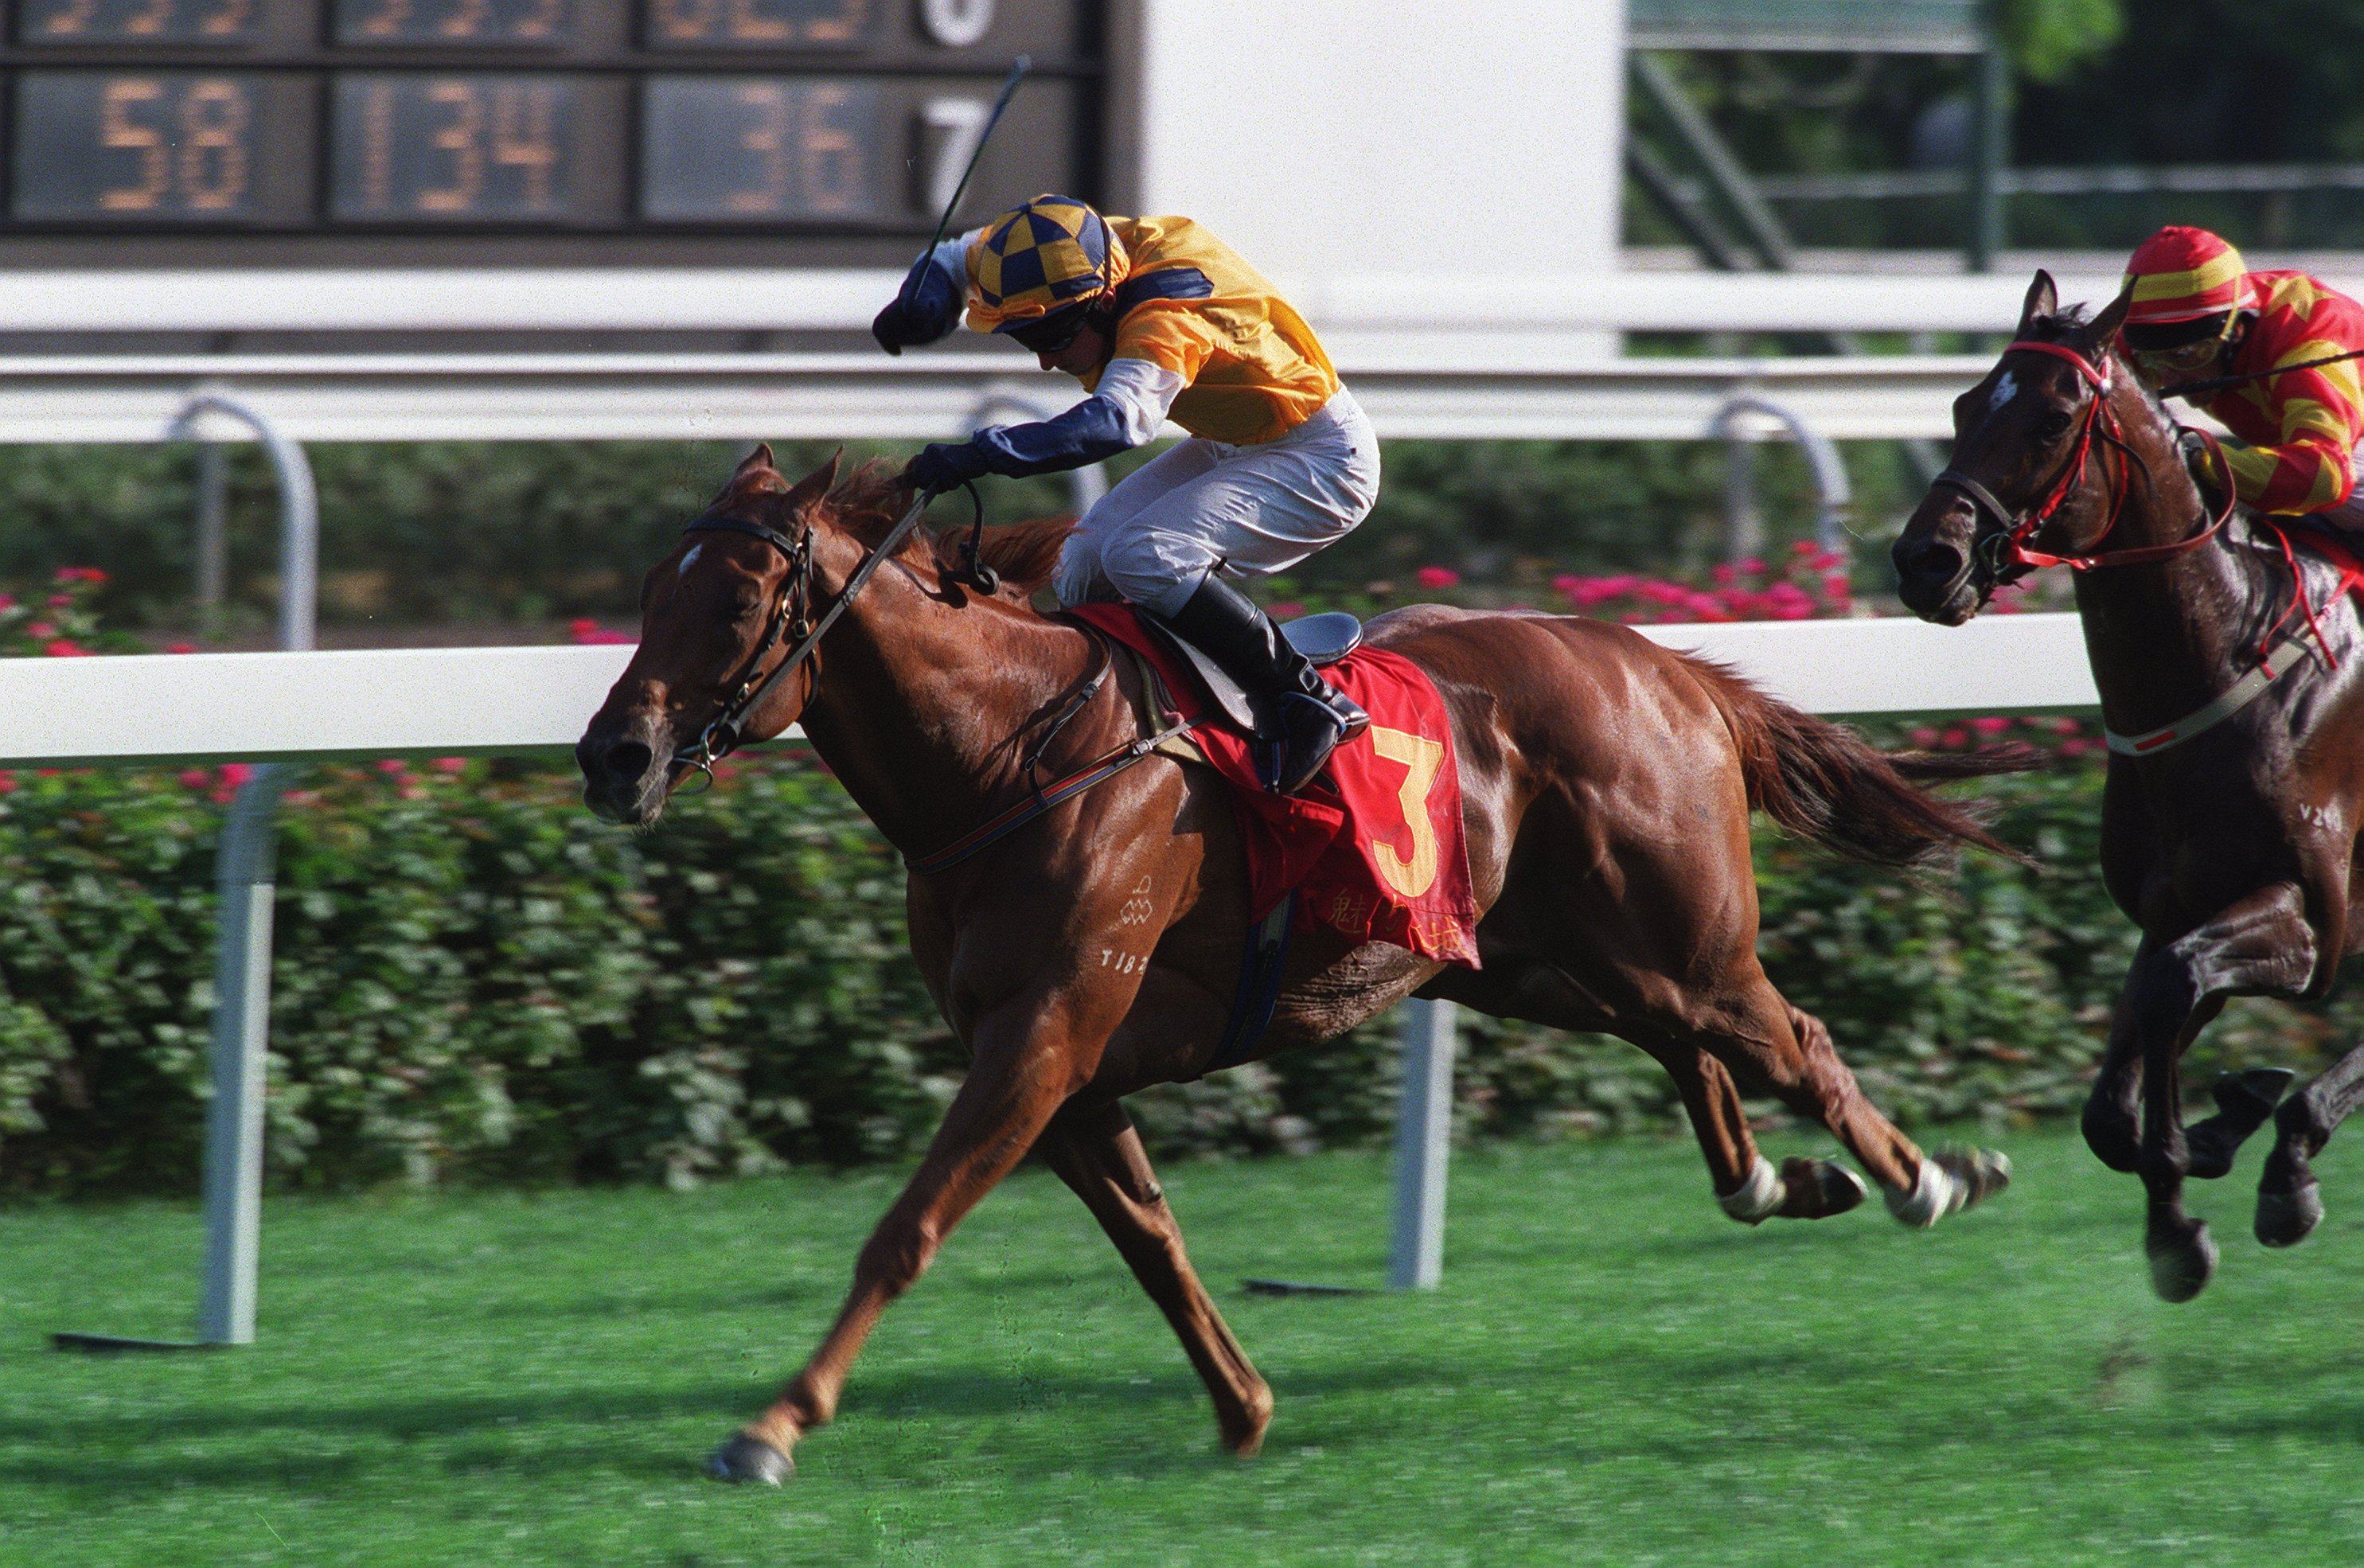 Charming City extends under Shane Dye to win the 2001 Classic Mile at Sha Tin. Photo: Oliver Tsang